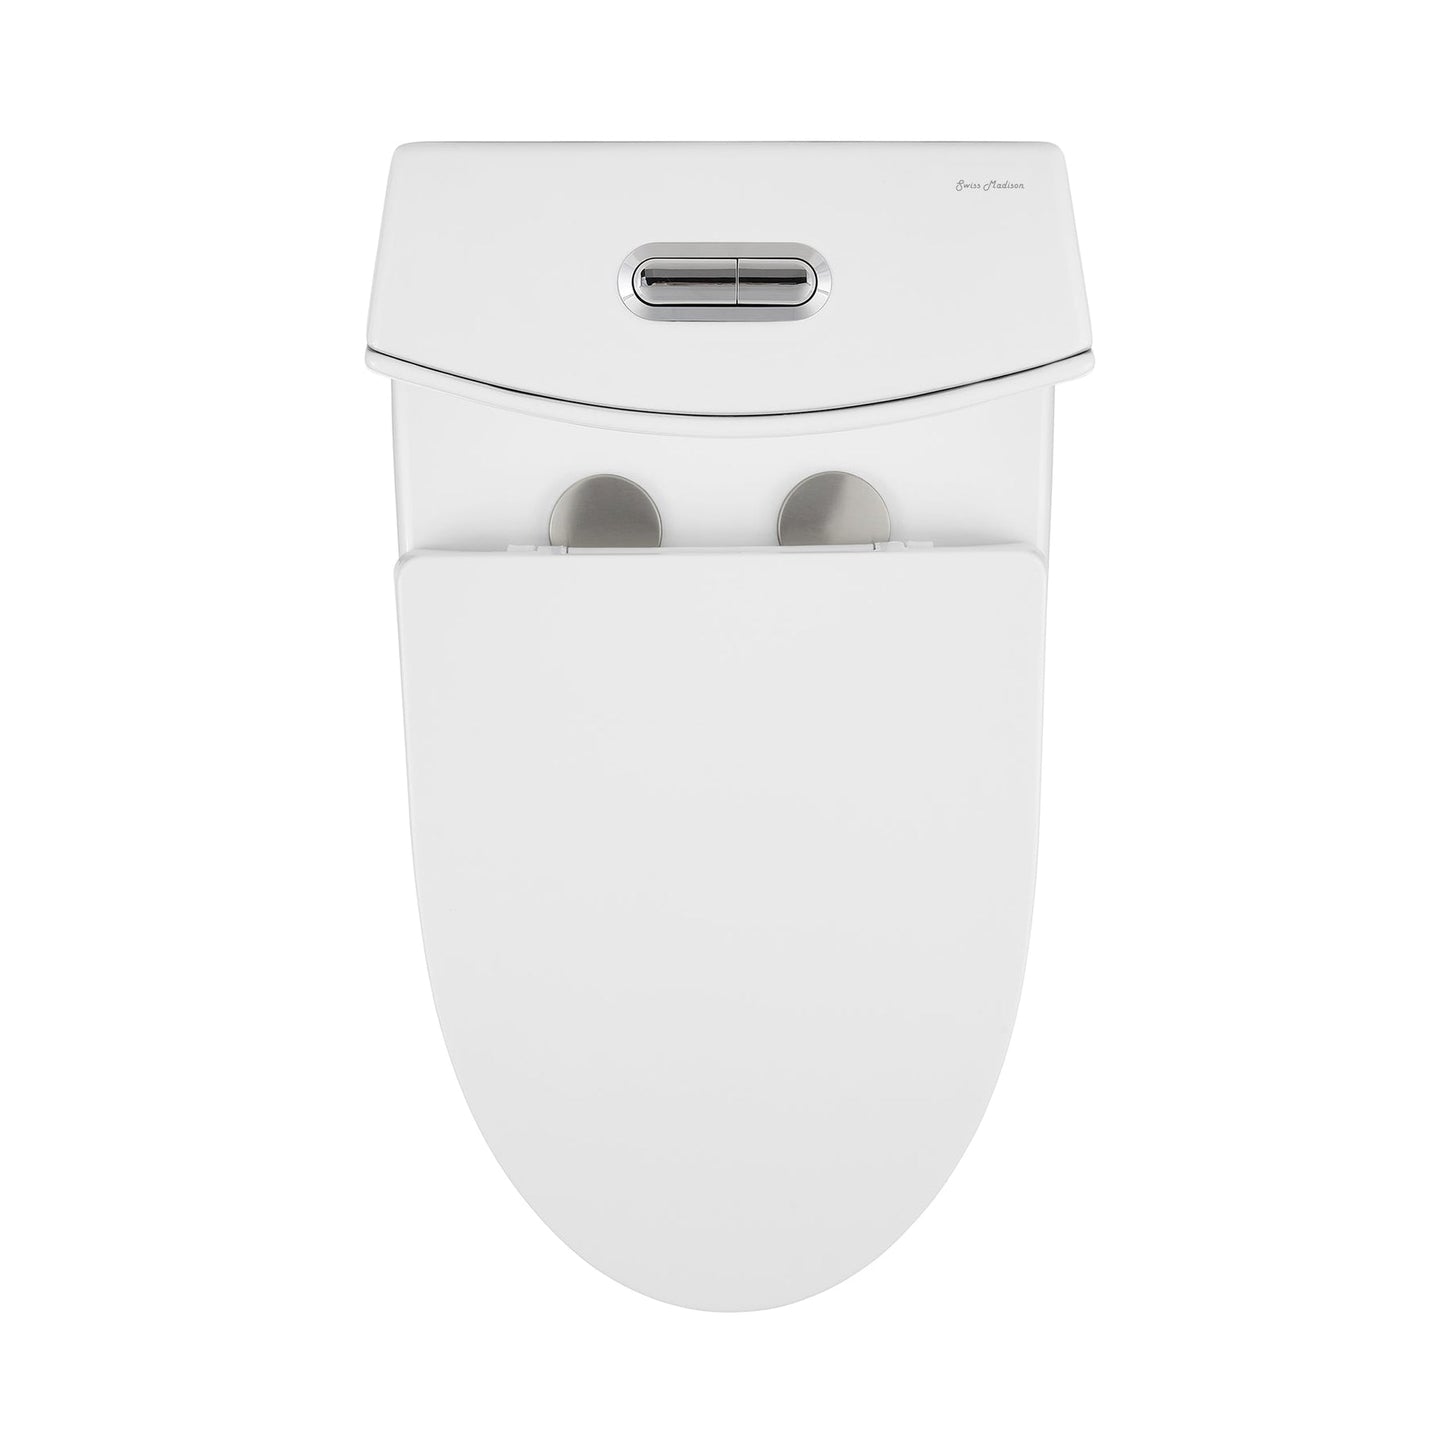 Swiss Madison St. Tropez 15" x 31" Glossy White One-Piece Elongated Floor Mounted Toilet With 12" Rough-In Valve and 1.1/1.6 GPF Vortex™ Dual-Flush Function